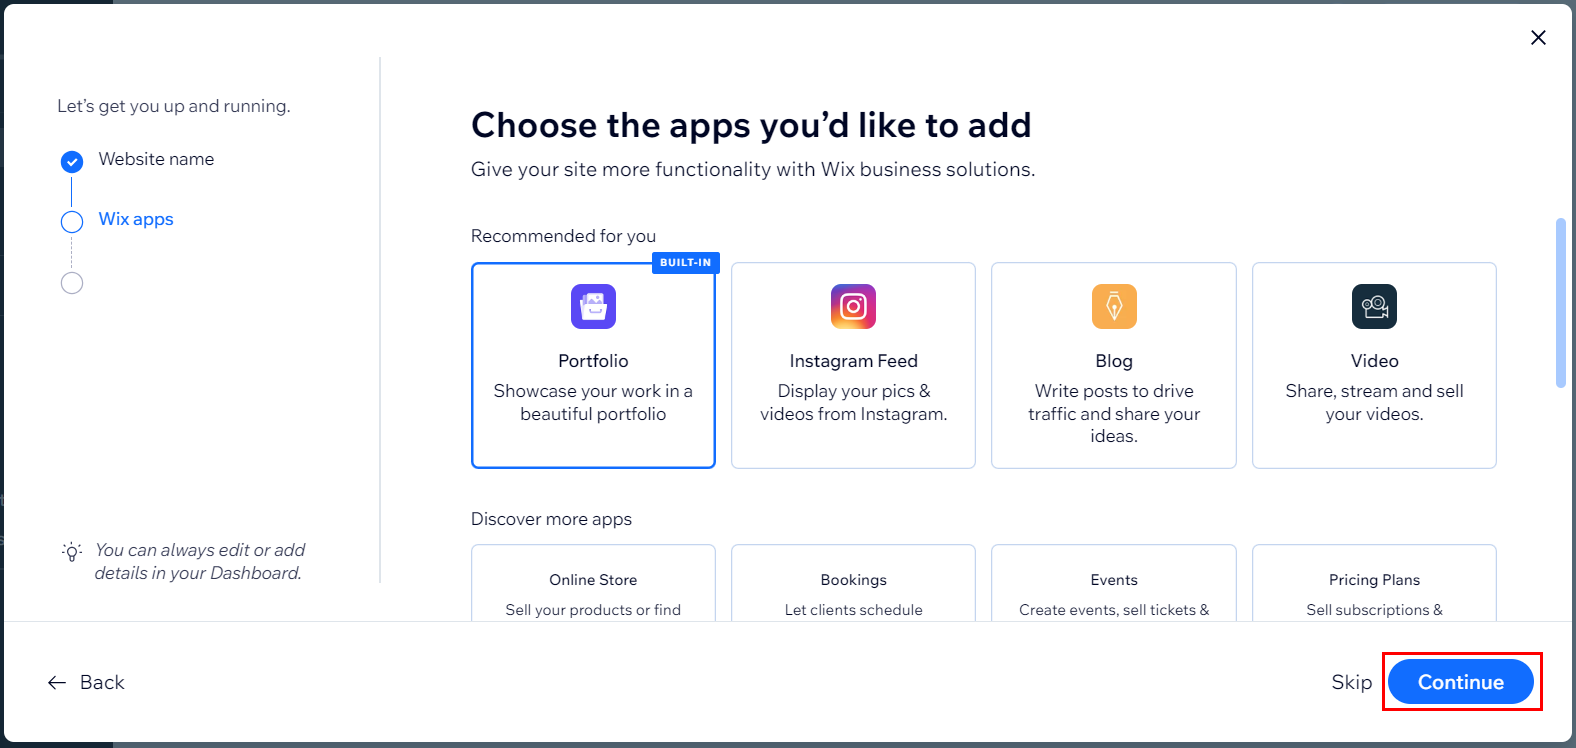 An image showing that the user should choose the apps that they'll like to add.